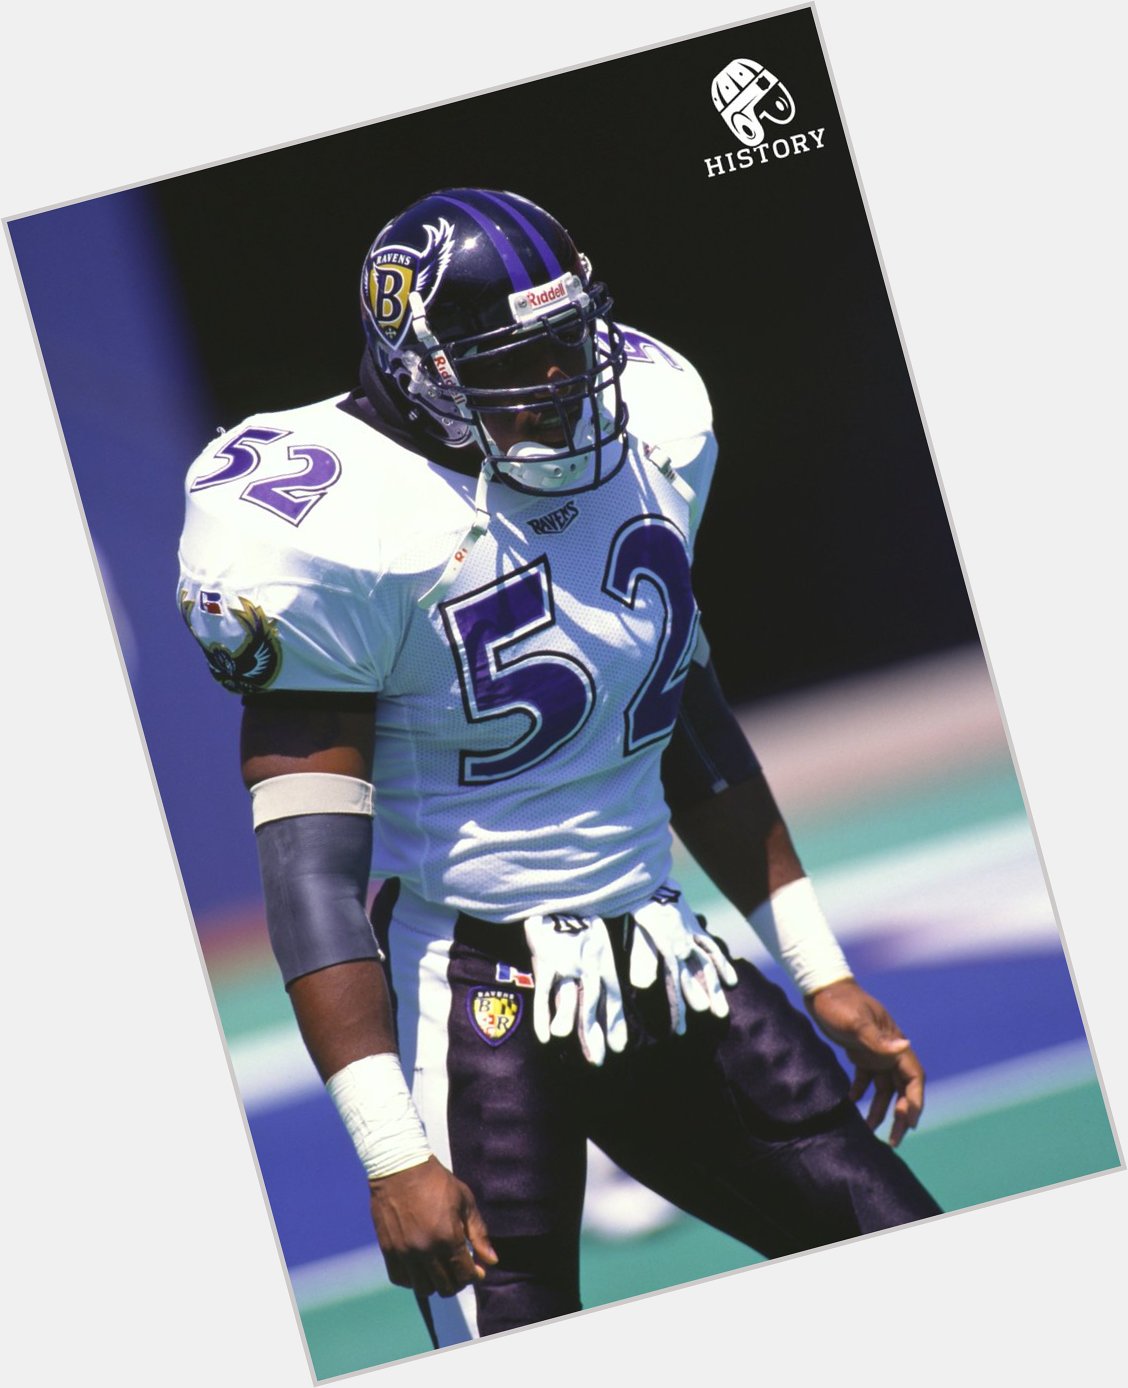 It all started in 1996 for 2x DPOY Ray Lewis. 

Happy birthday  